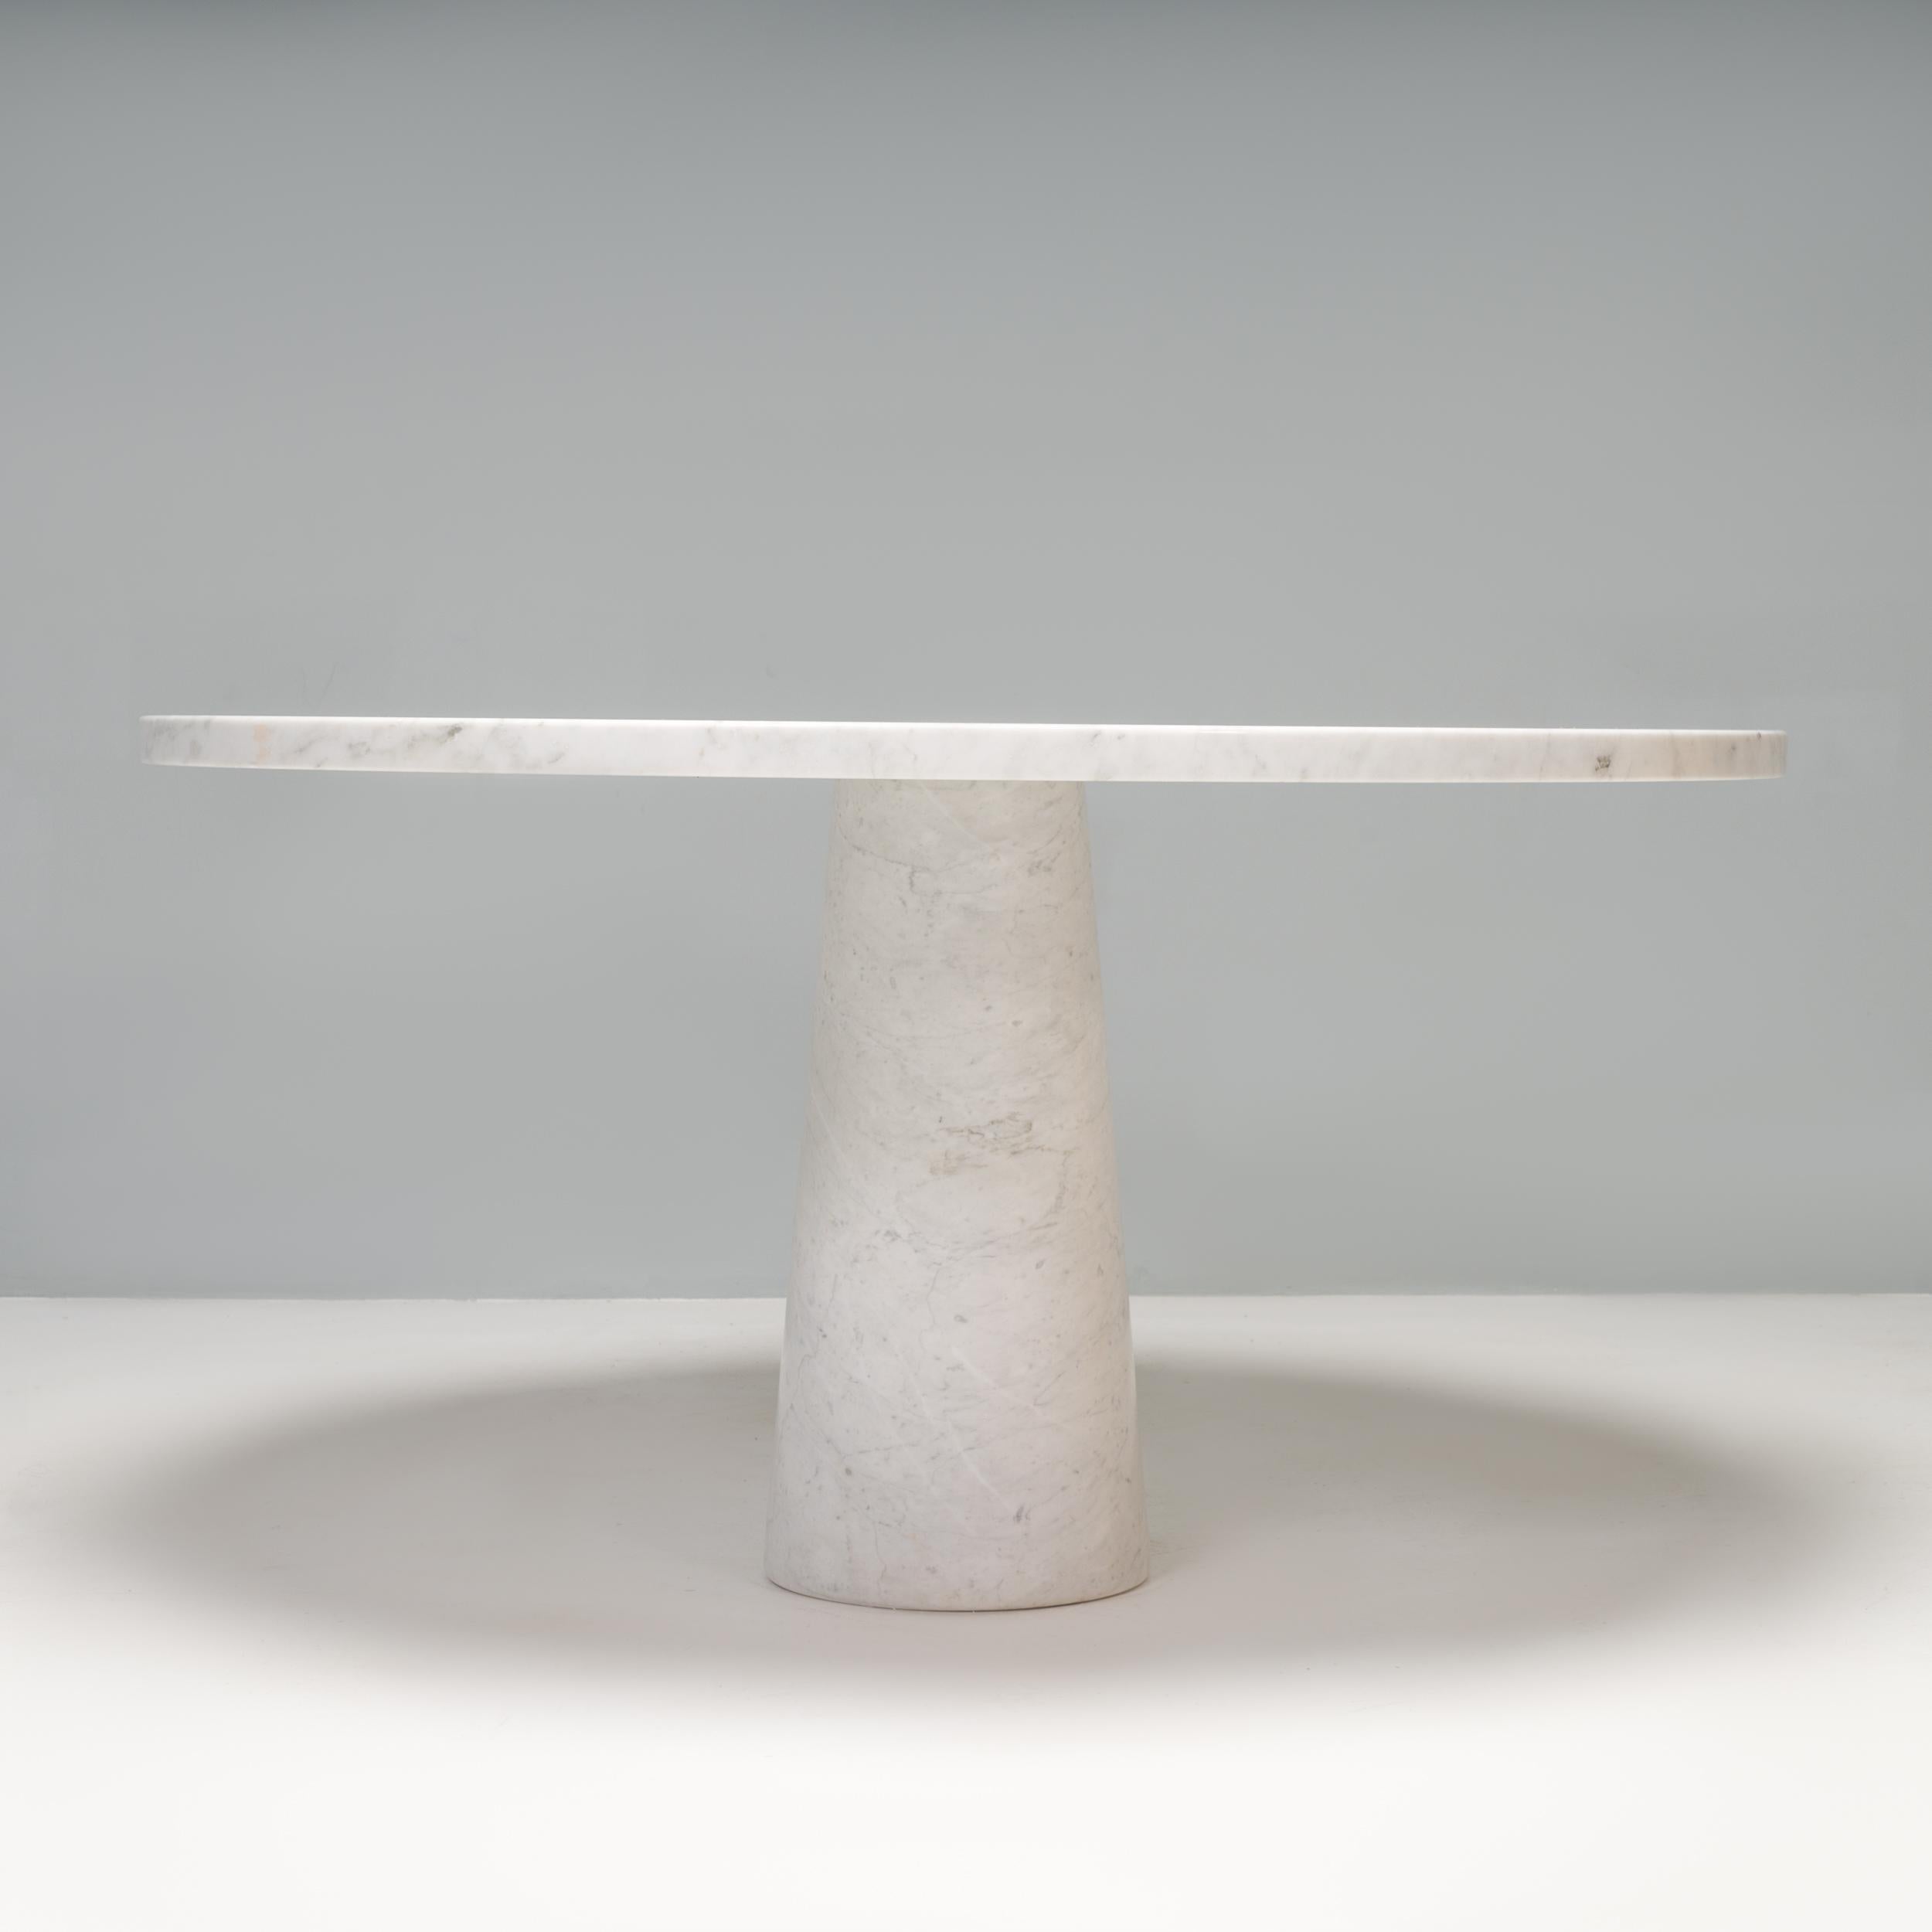 Designed by Angelo Mangiarotti for Skipper & Pollux in the 1960s, the M1 Table has since become an icon of mid century Italian design.

Constructed from solid carrara marble, the dining table features a conical base and smooth round table